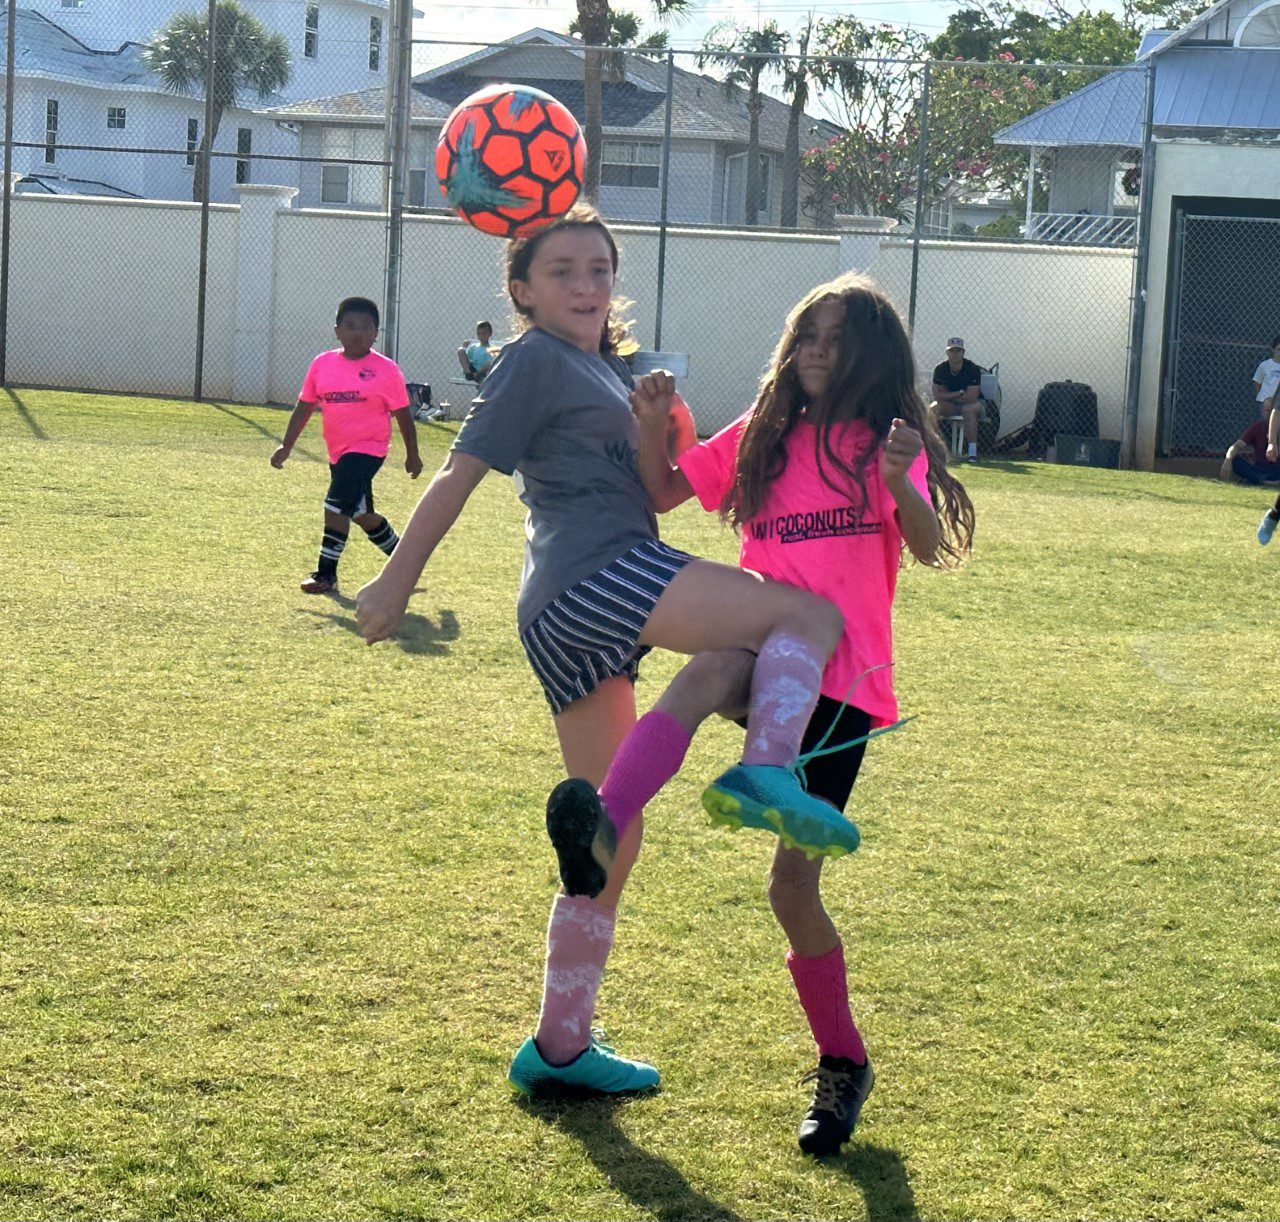 Cheesecake Cutie remains undefeated in Center youth soccer